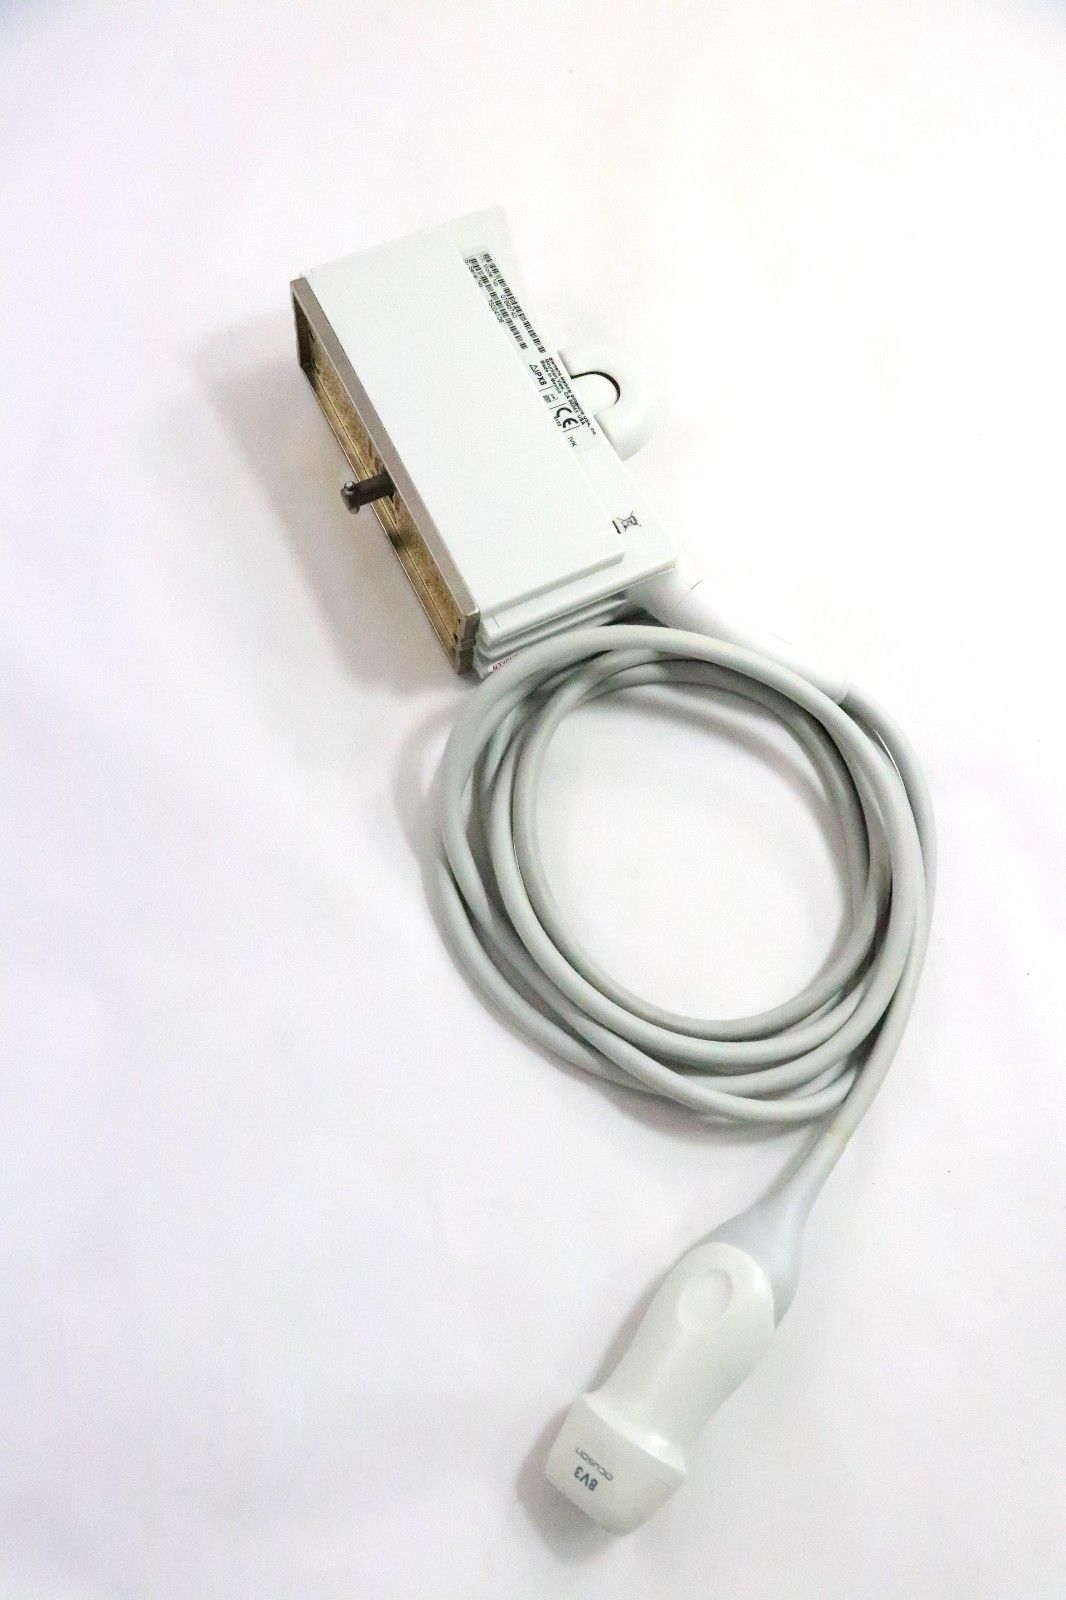 Reconditioned Siemens/Acuson 8V3 Ultrasound Transducer DIAGNOSTIC ULTRASOUND MACHINES FOR SALE